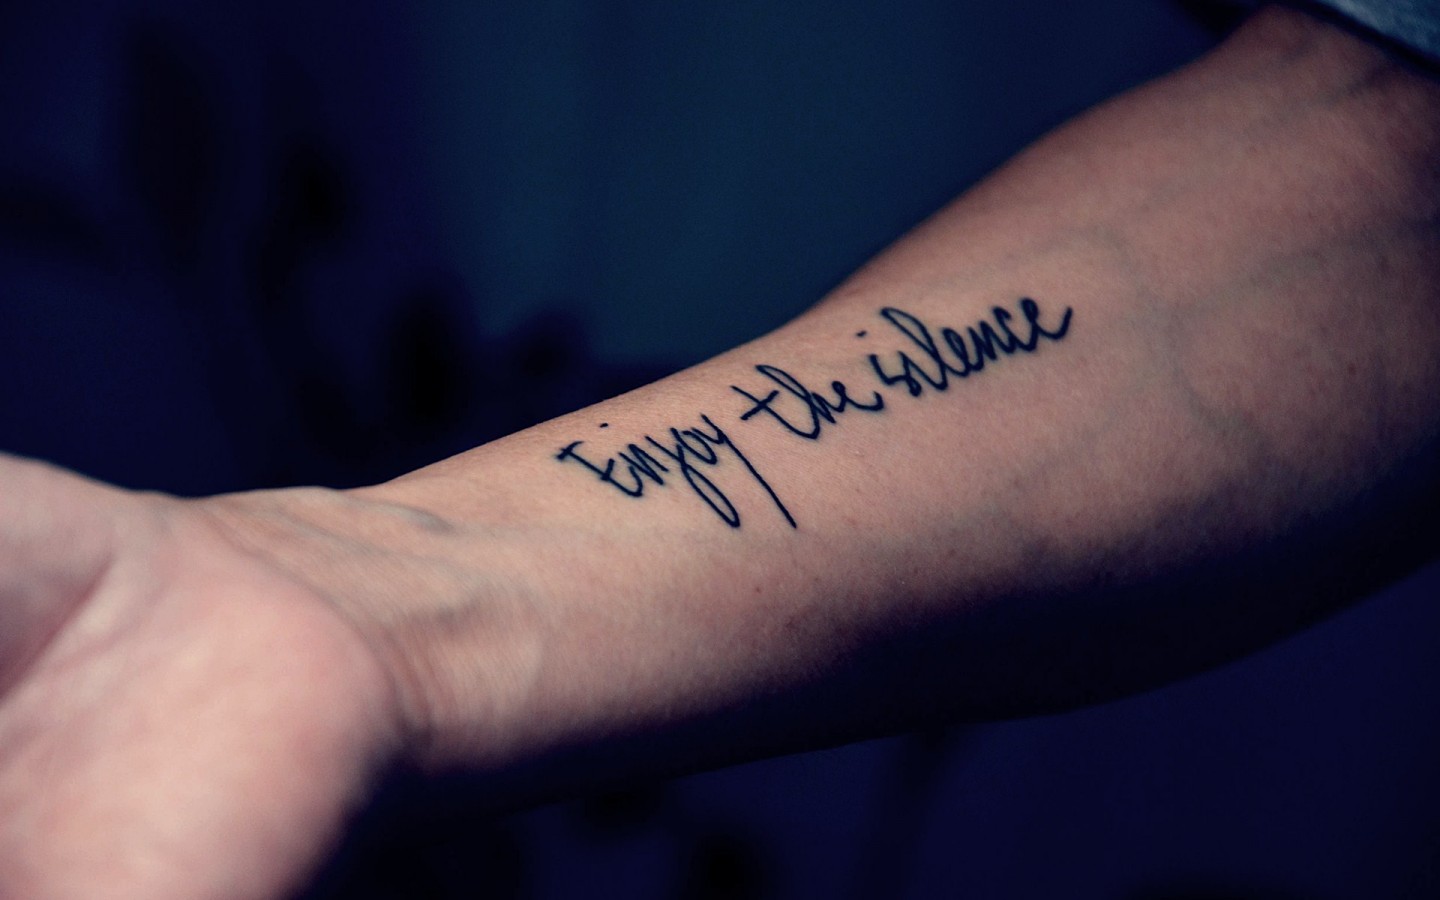 Enjoy The Silence Lettering Tattoo On Forearm